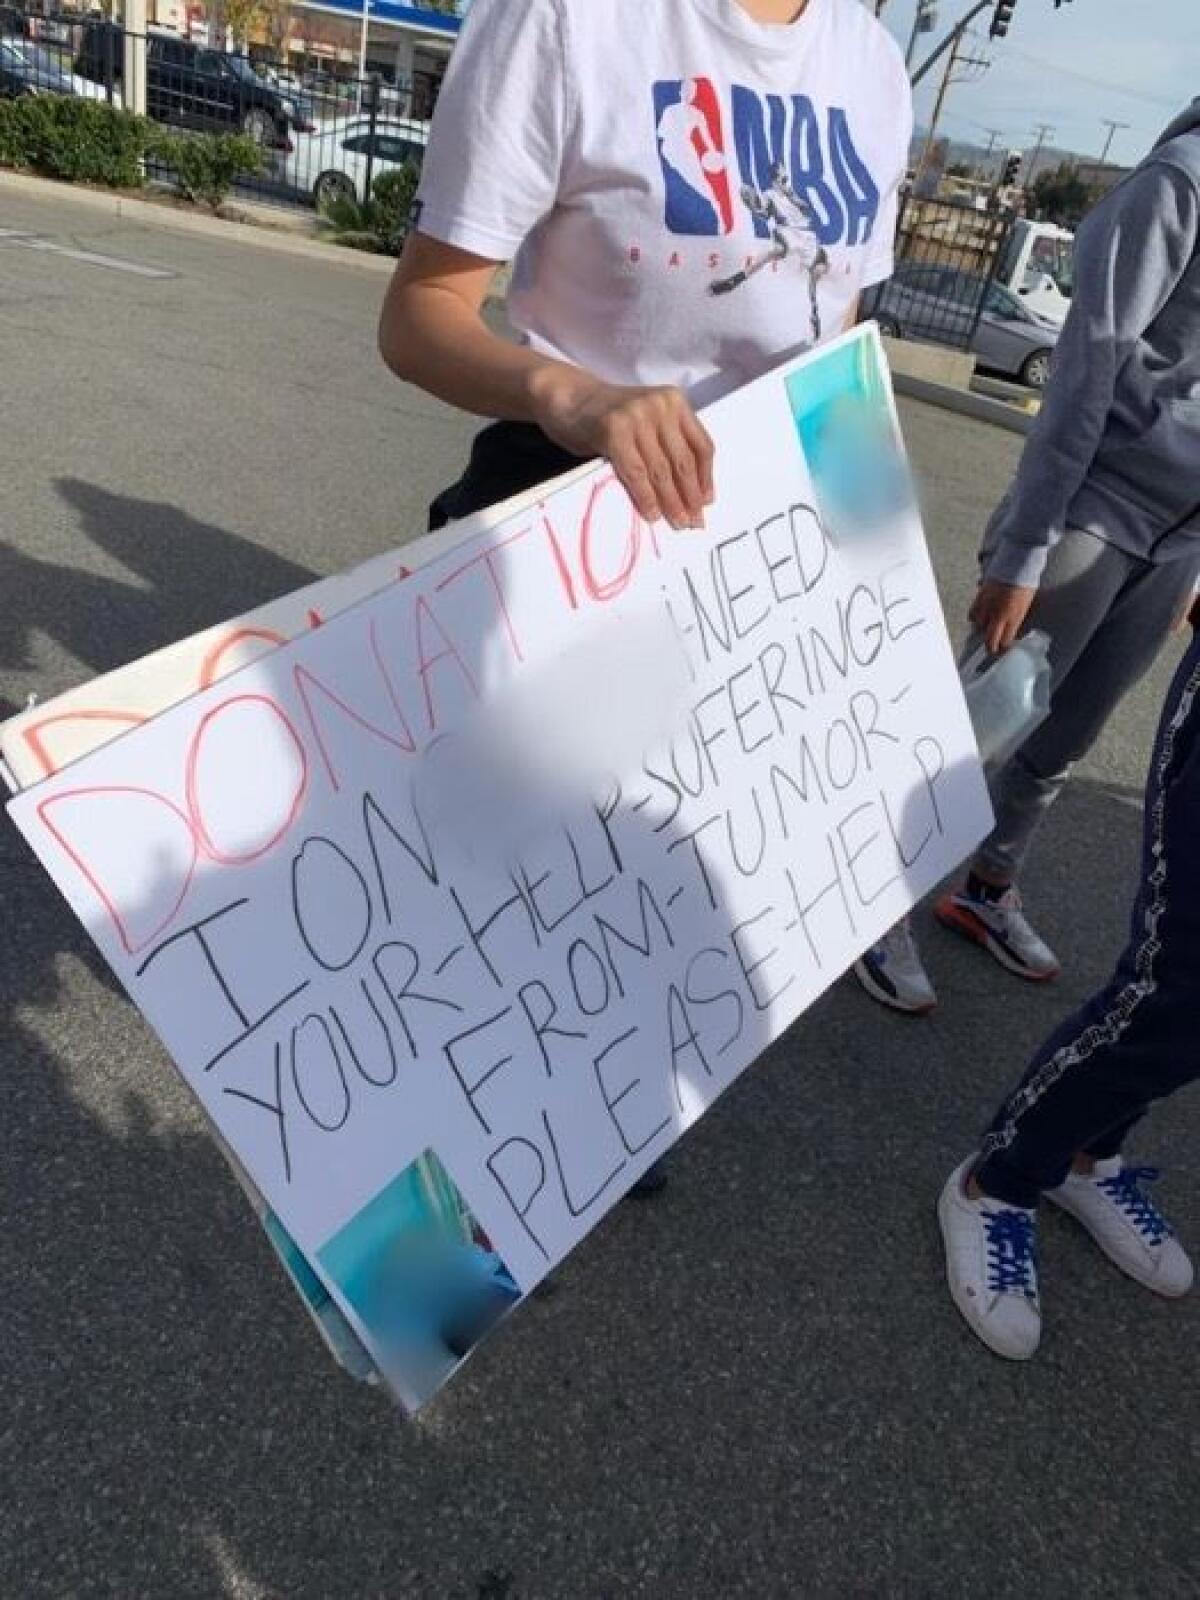 A teenager holding a handwritten sign asking for donations for someone suffering from a tumor